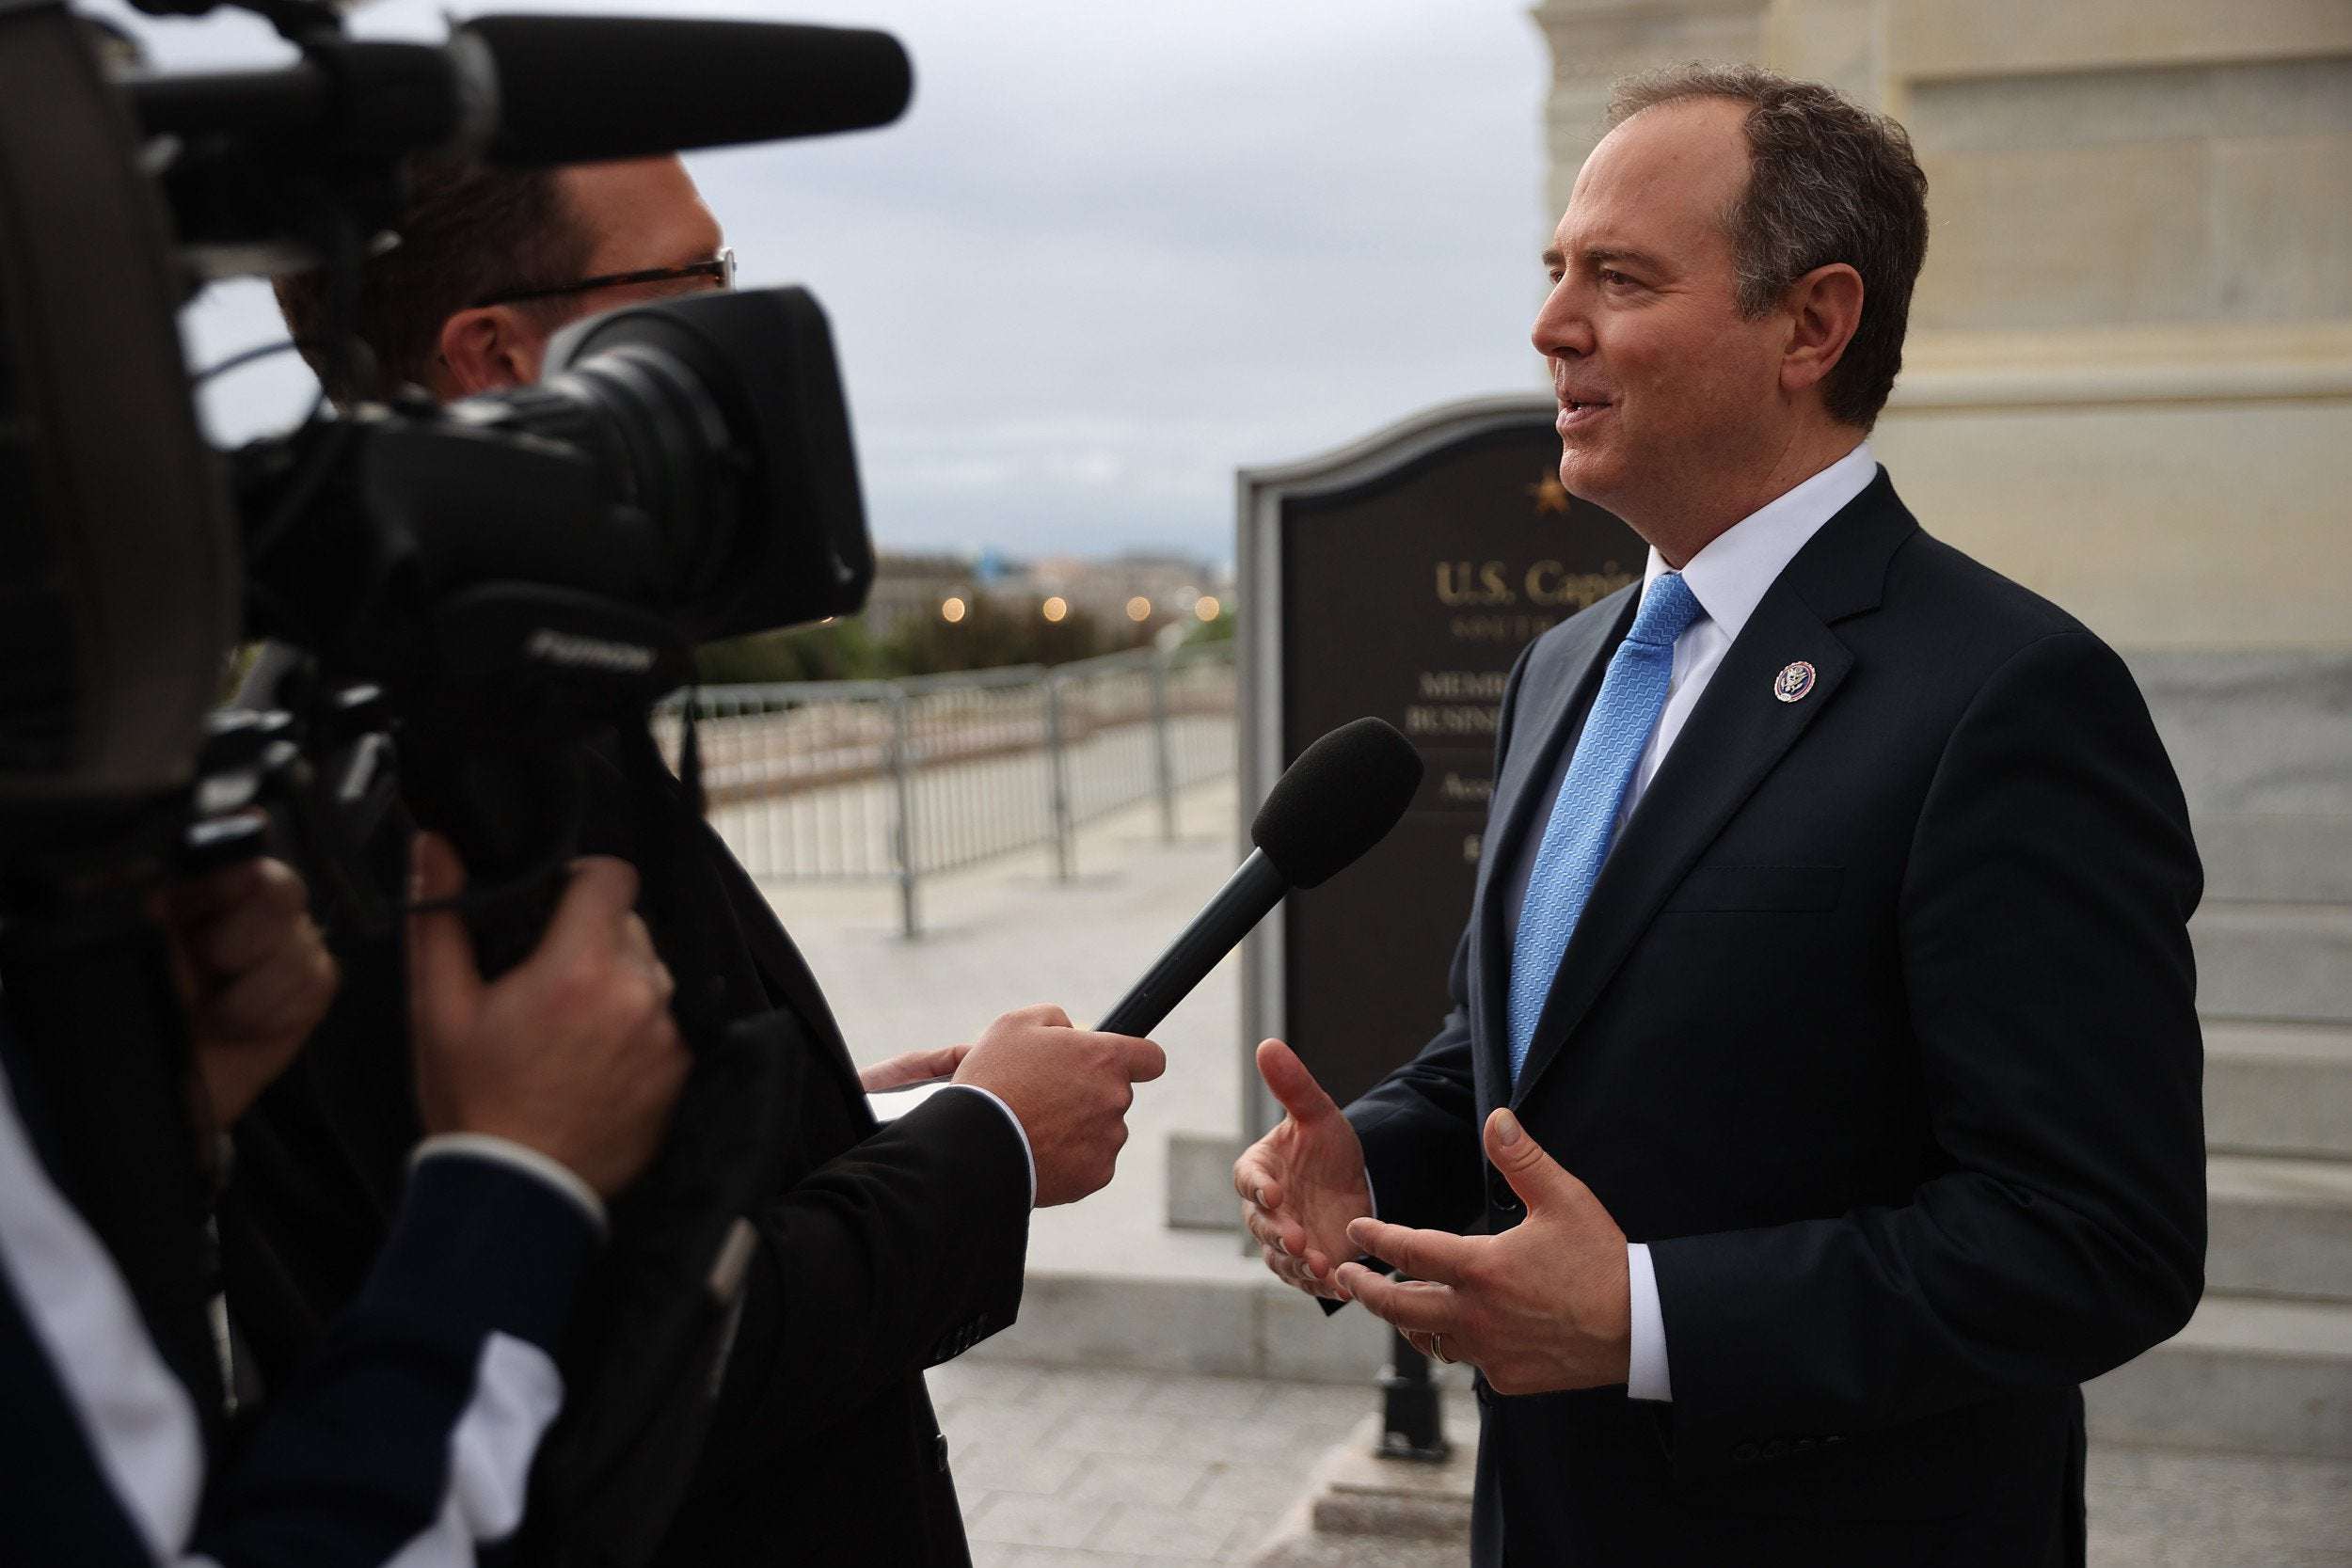 image for Adam Schiff Mocks Republicans' Infrastructure Vows Under Trump: 'They Never Delivered'